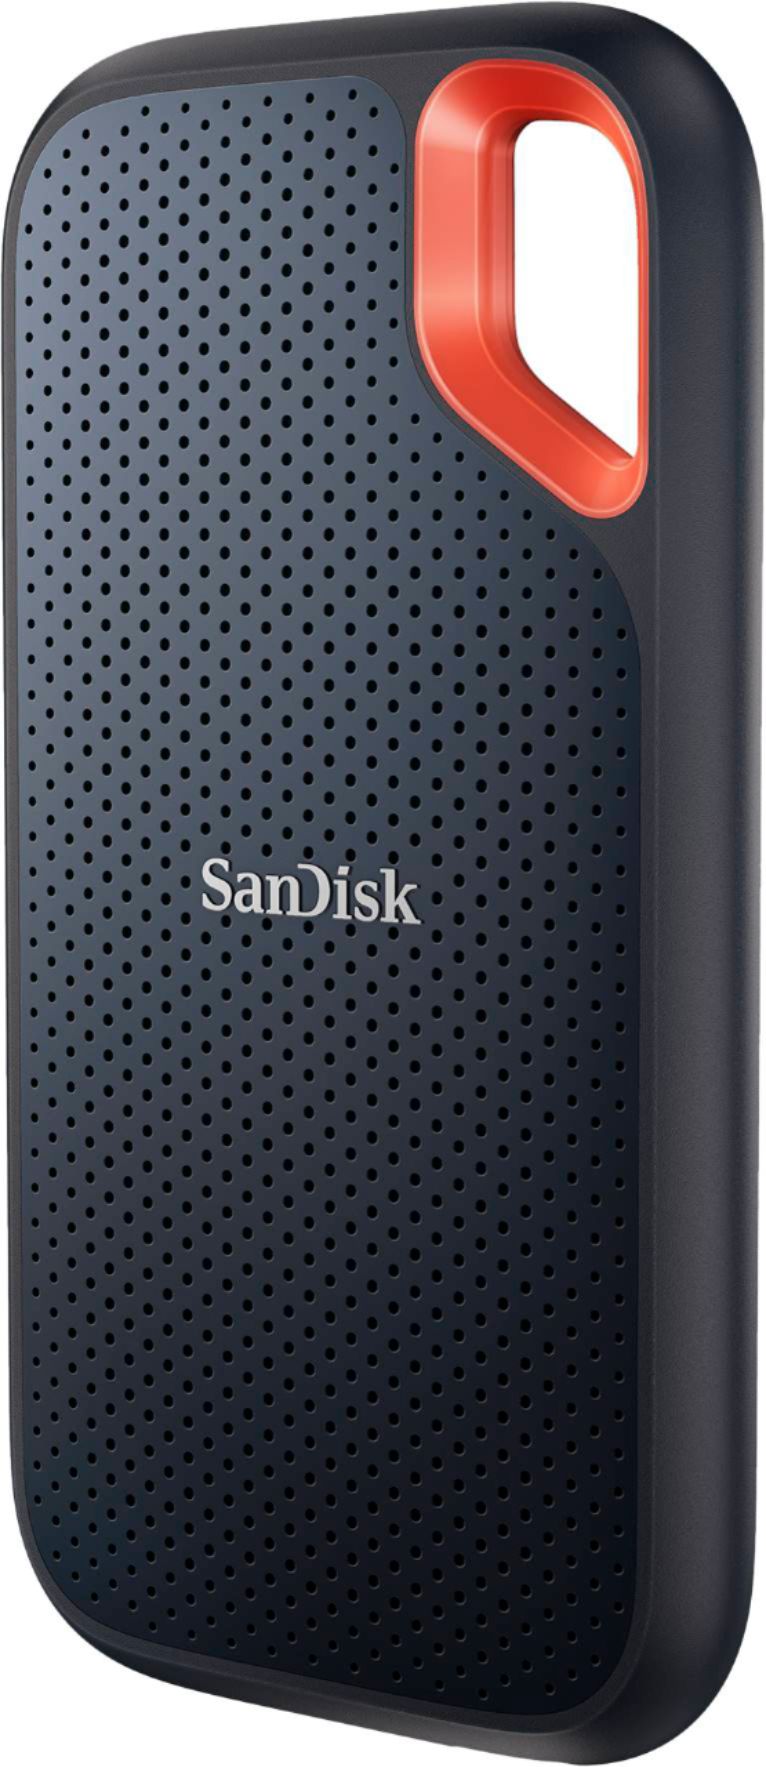 SanDisk Extreme Portable SSD External Solid State Drive 500GB SDSSDE60-500G-G25 